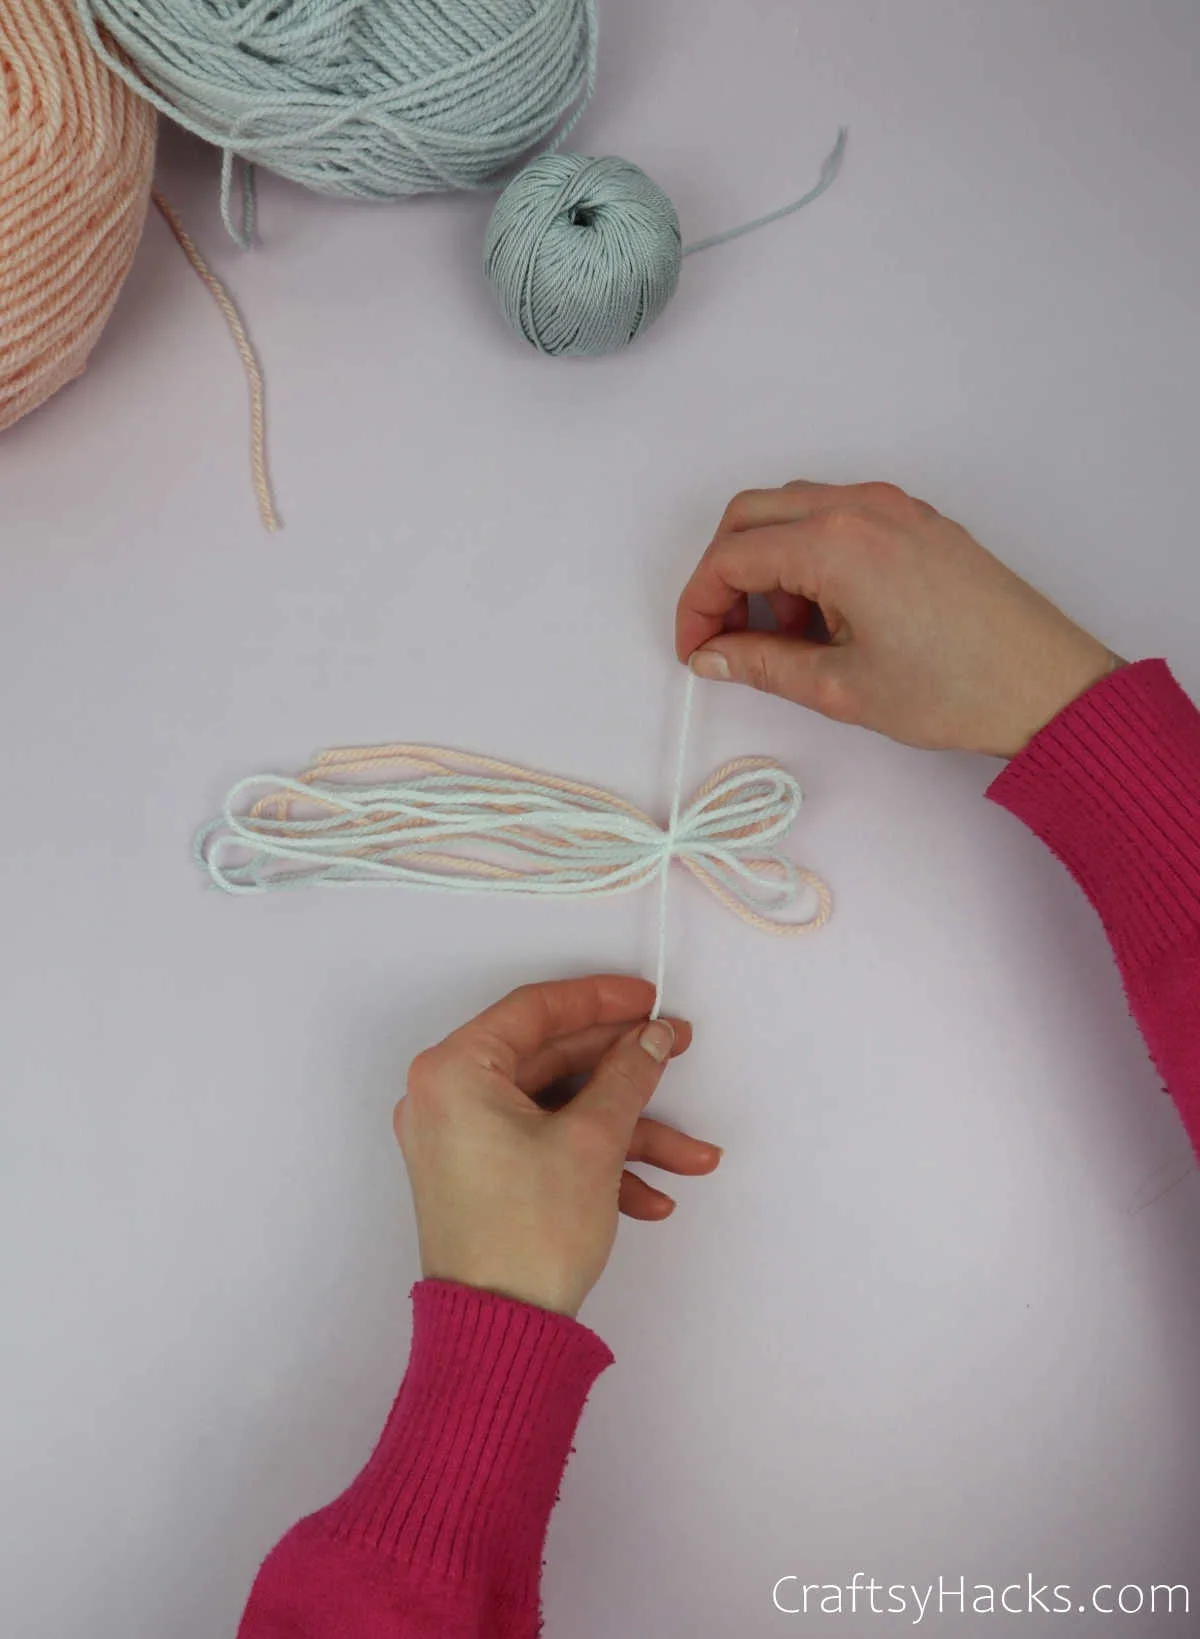 knotting end of yarn